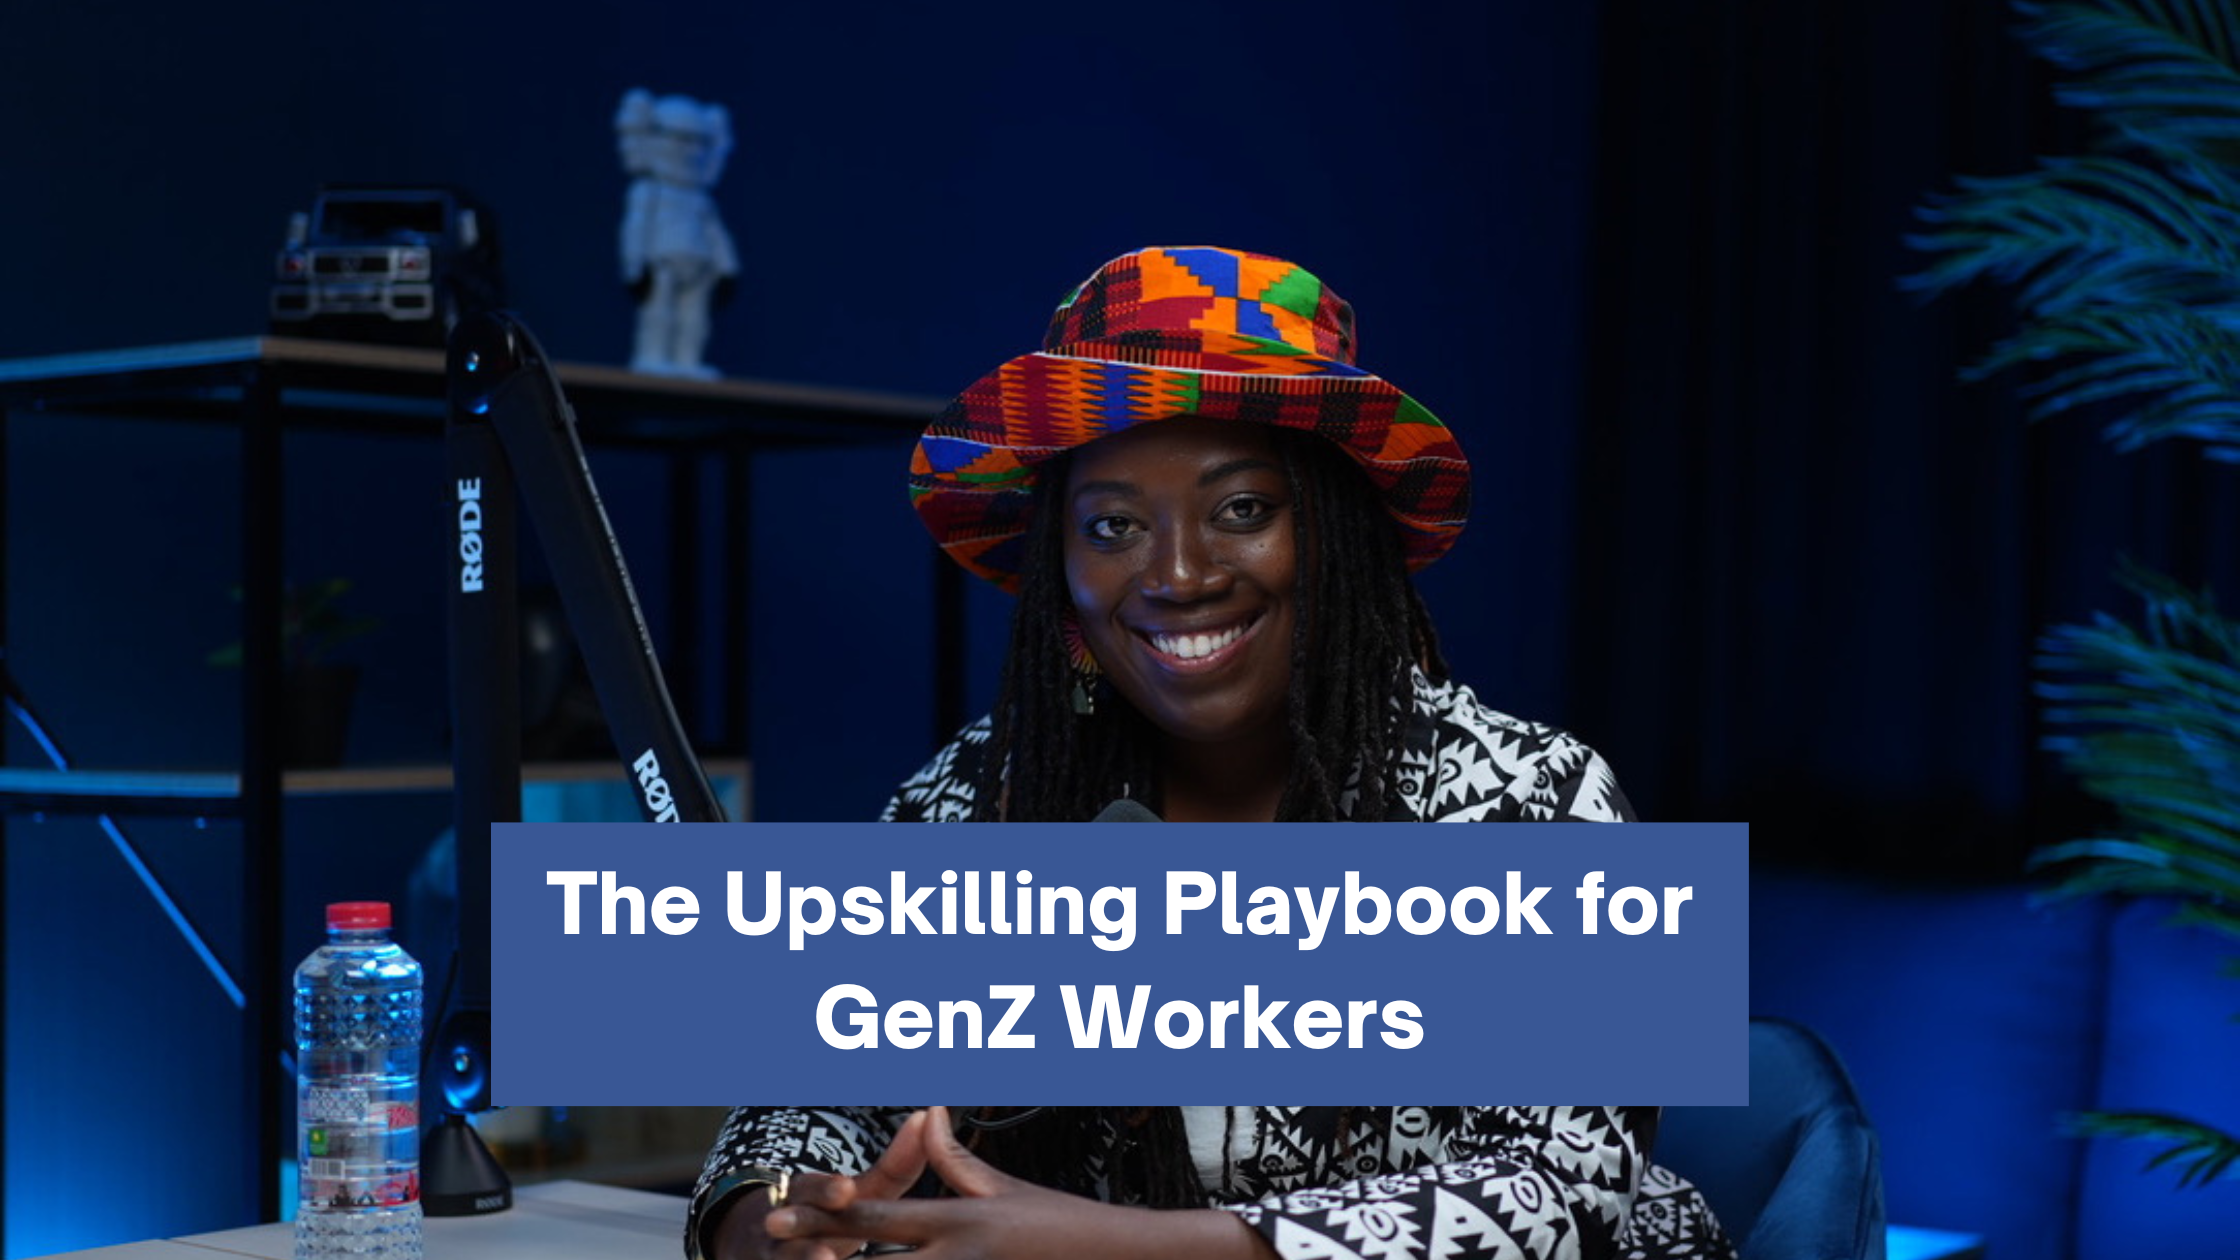 The Upskilling Playbook for GenZ Workers